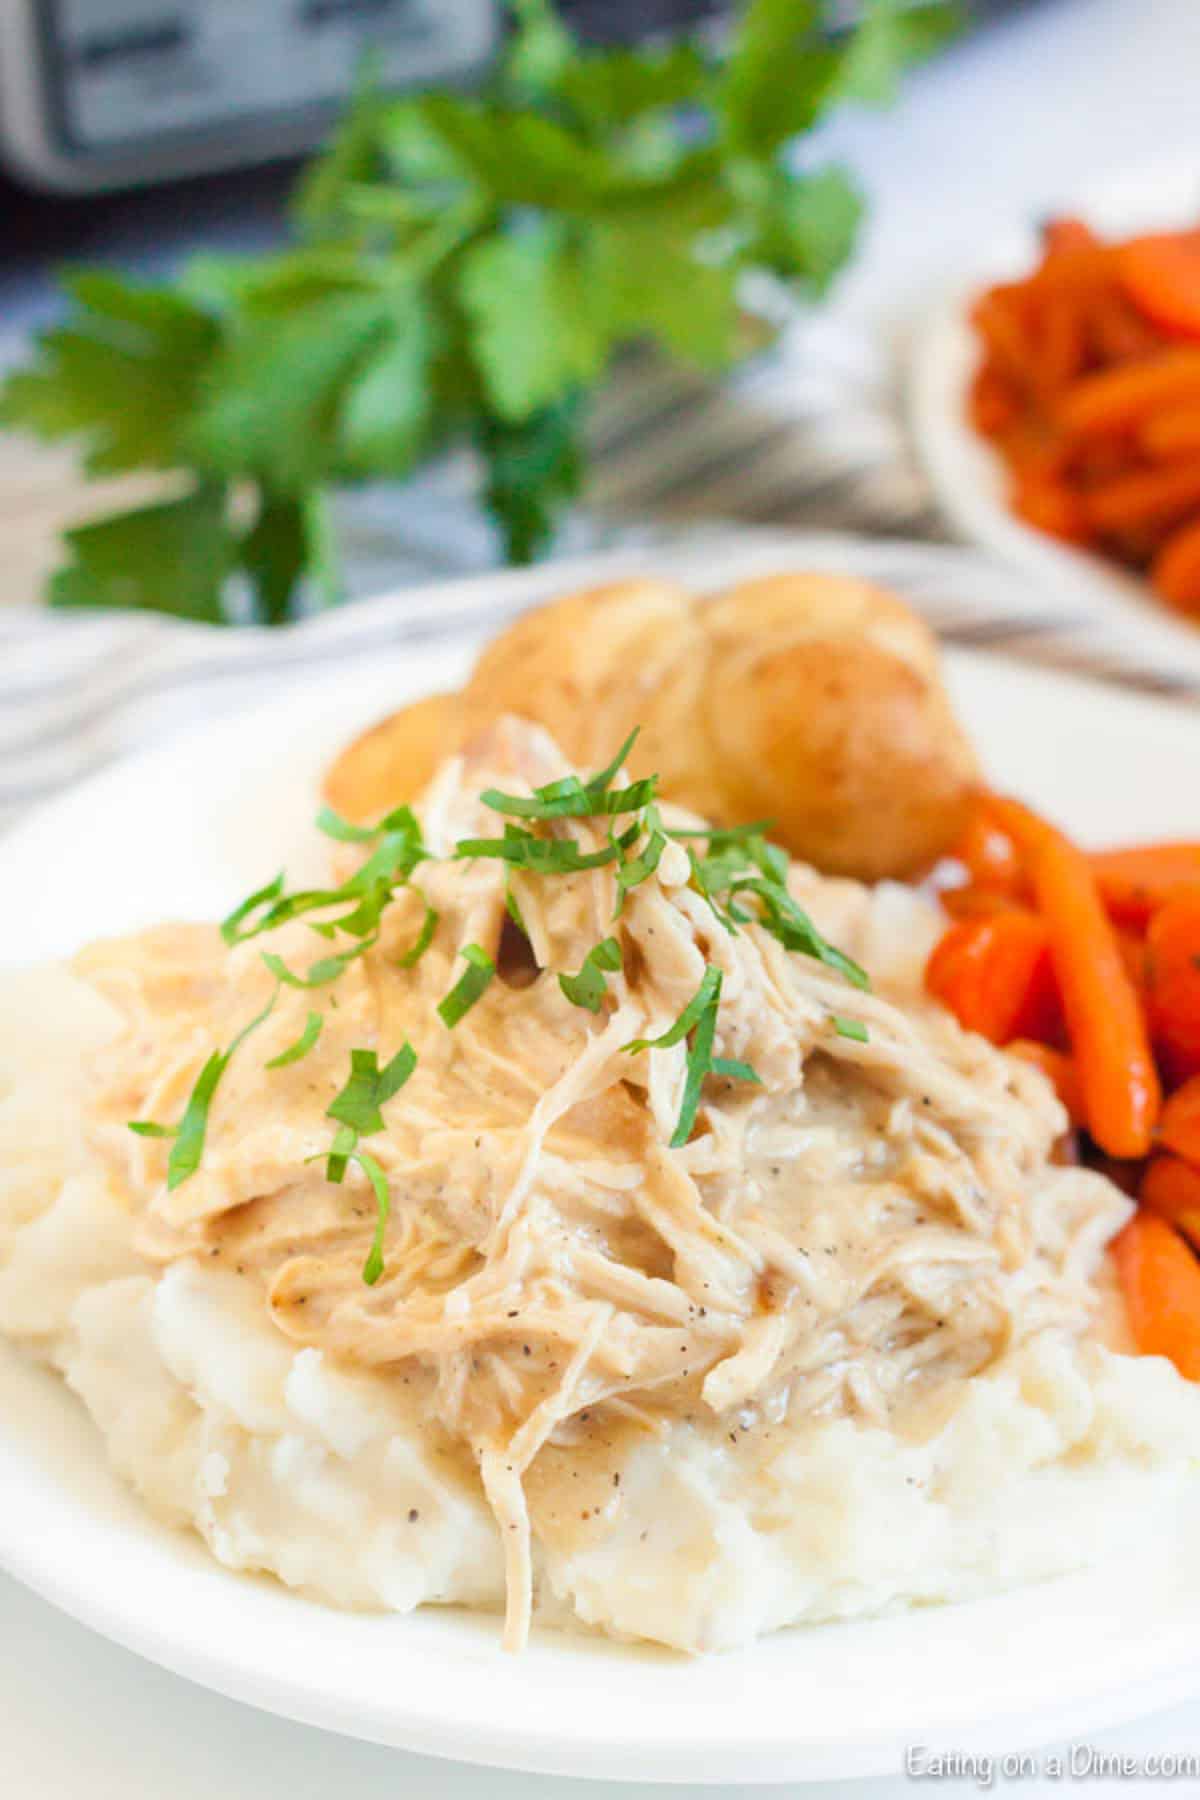 Chicken and gravy over mashed potatoes on a plate with carrot